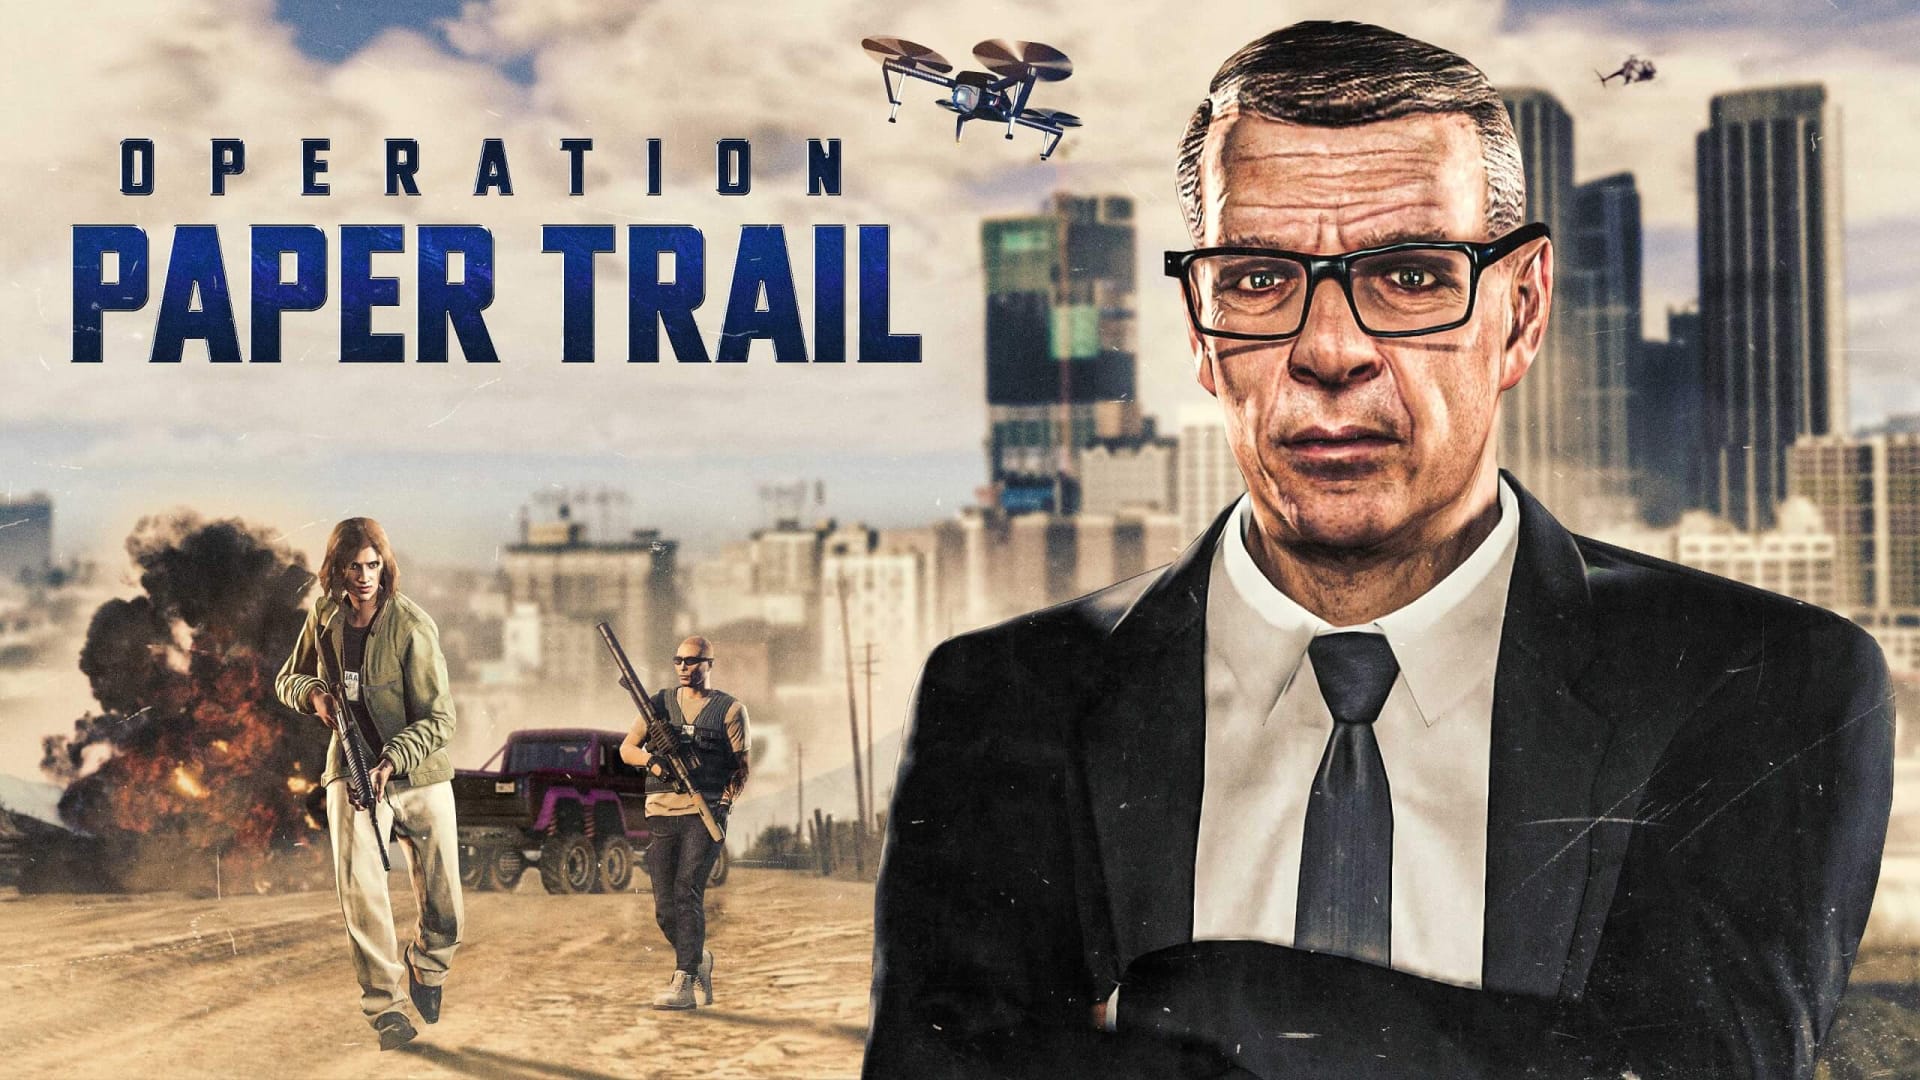 GTA Online's Operation Papertrail will have players hunting for double rewards.